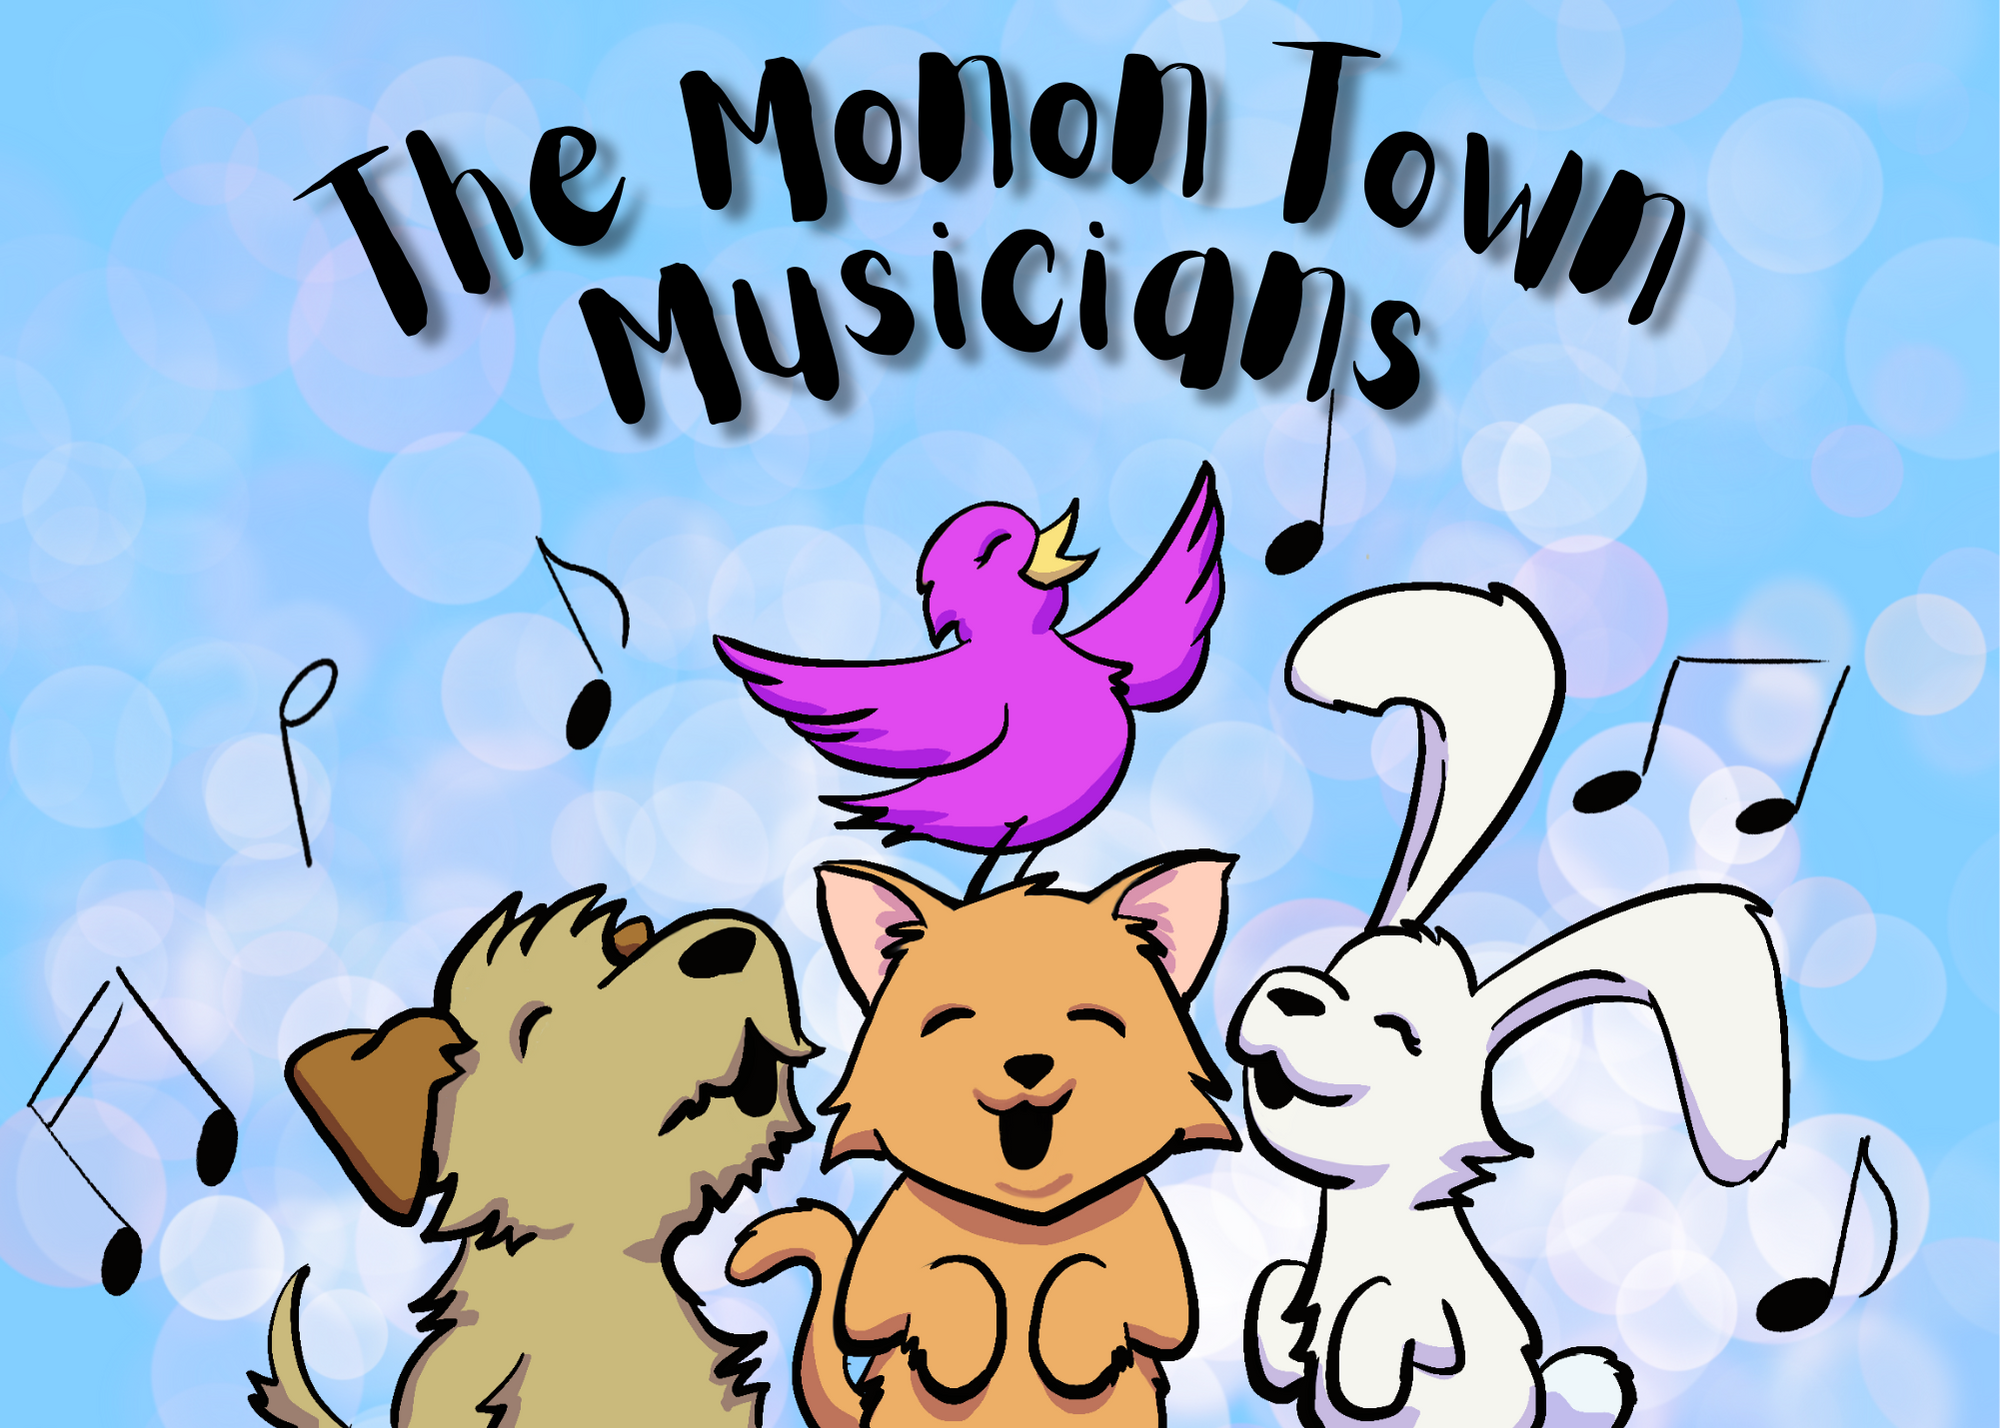 Cartoon drawing of a dog, a cat, a rabbit, and a bird with musical notes